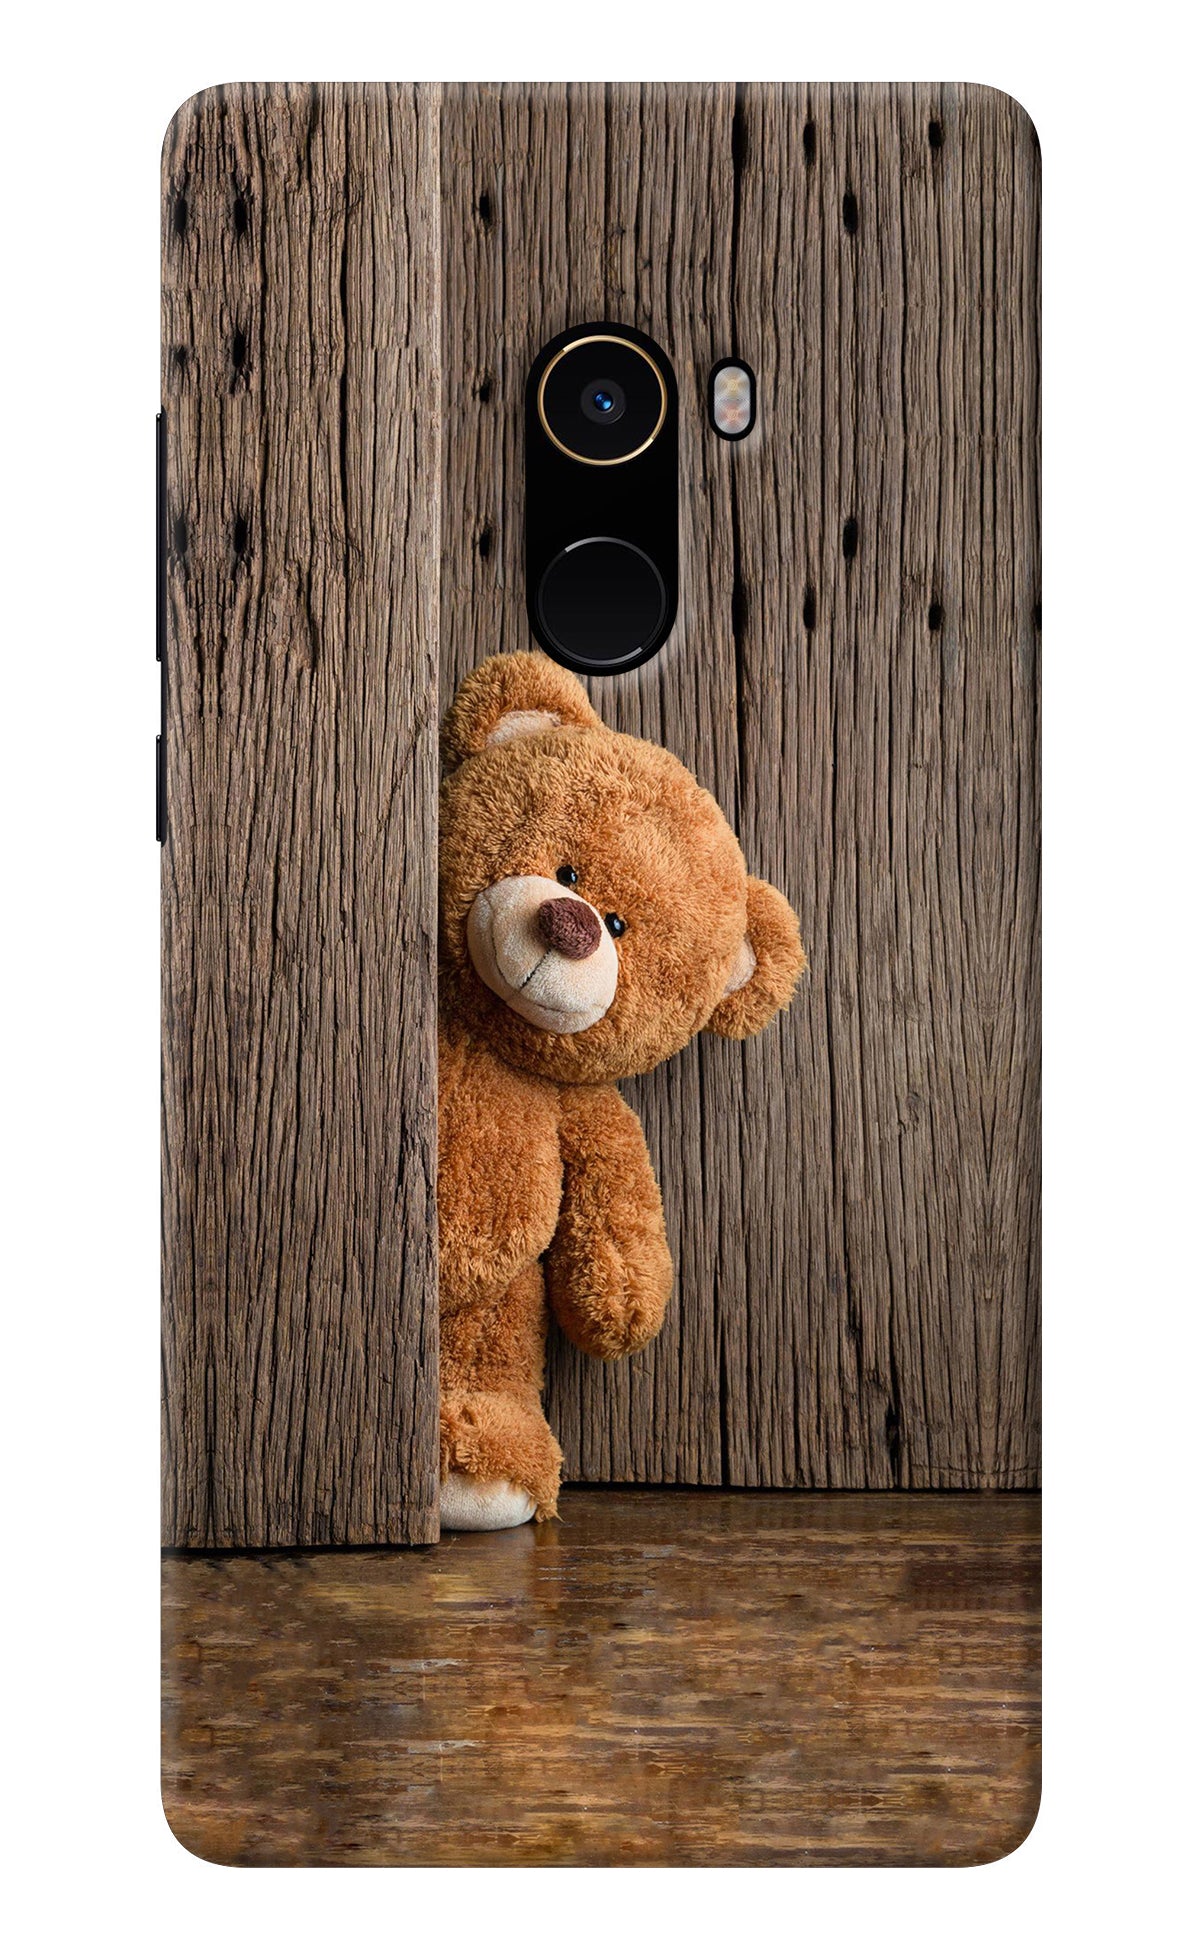 Teddy Wooden Mi Mix 2 Back Cover